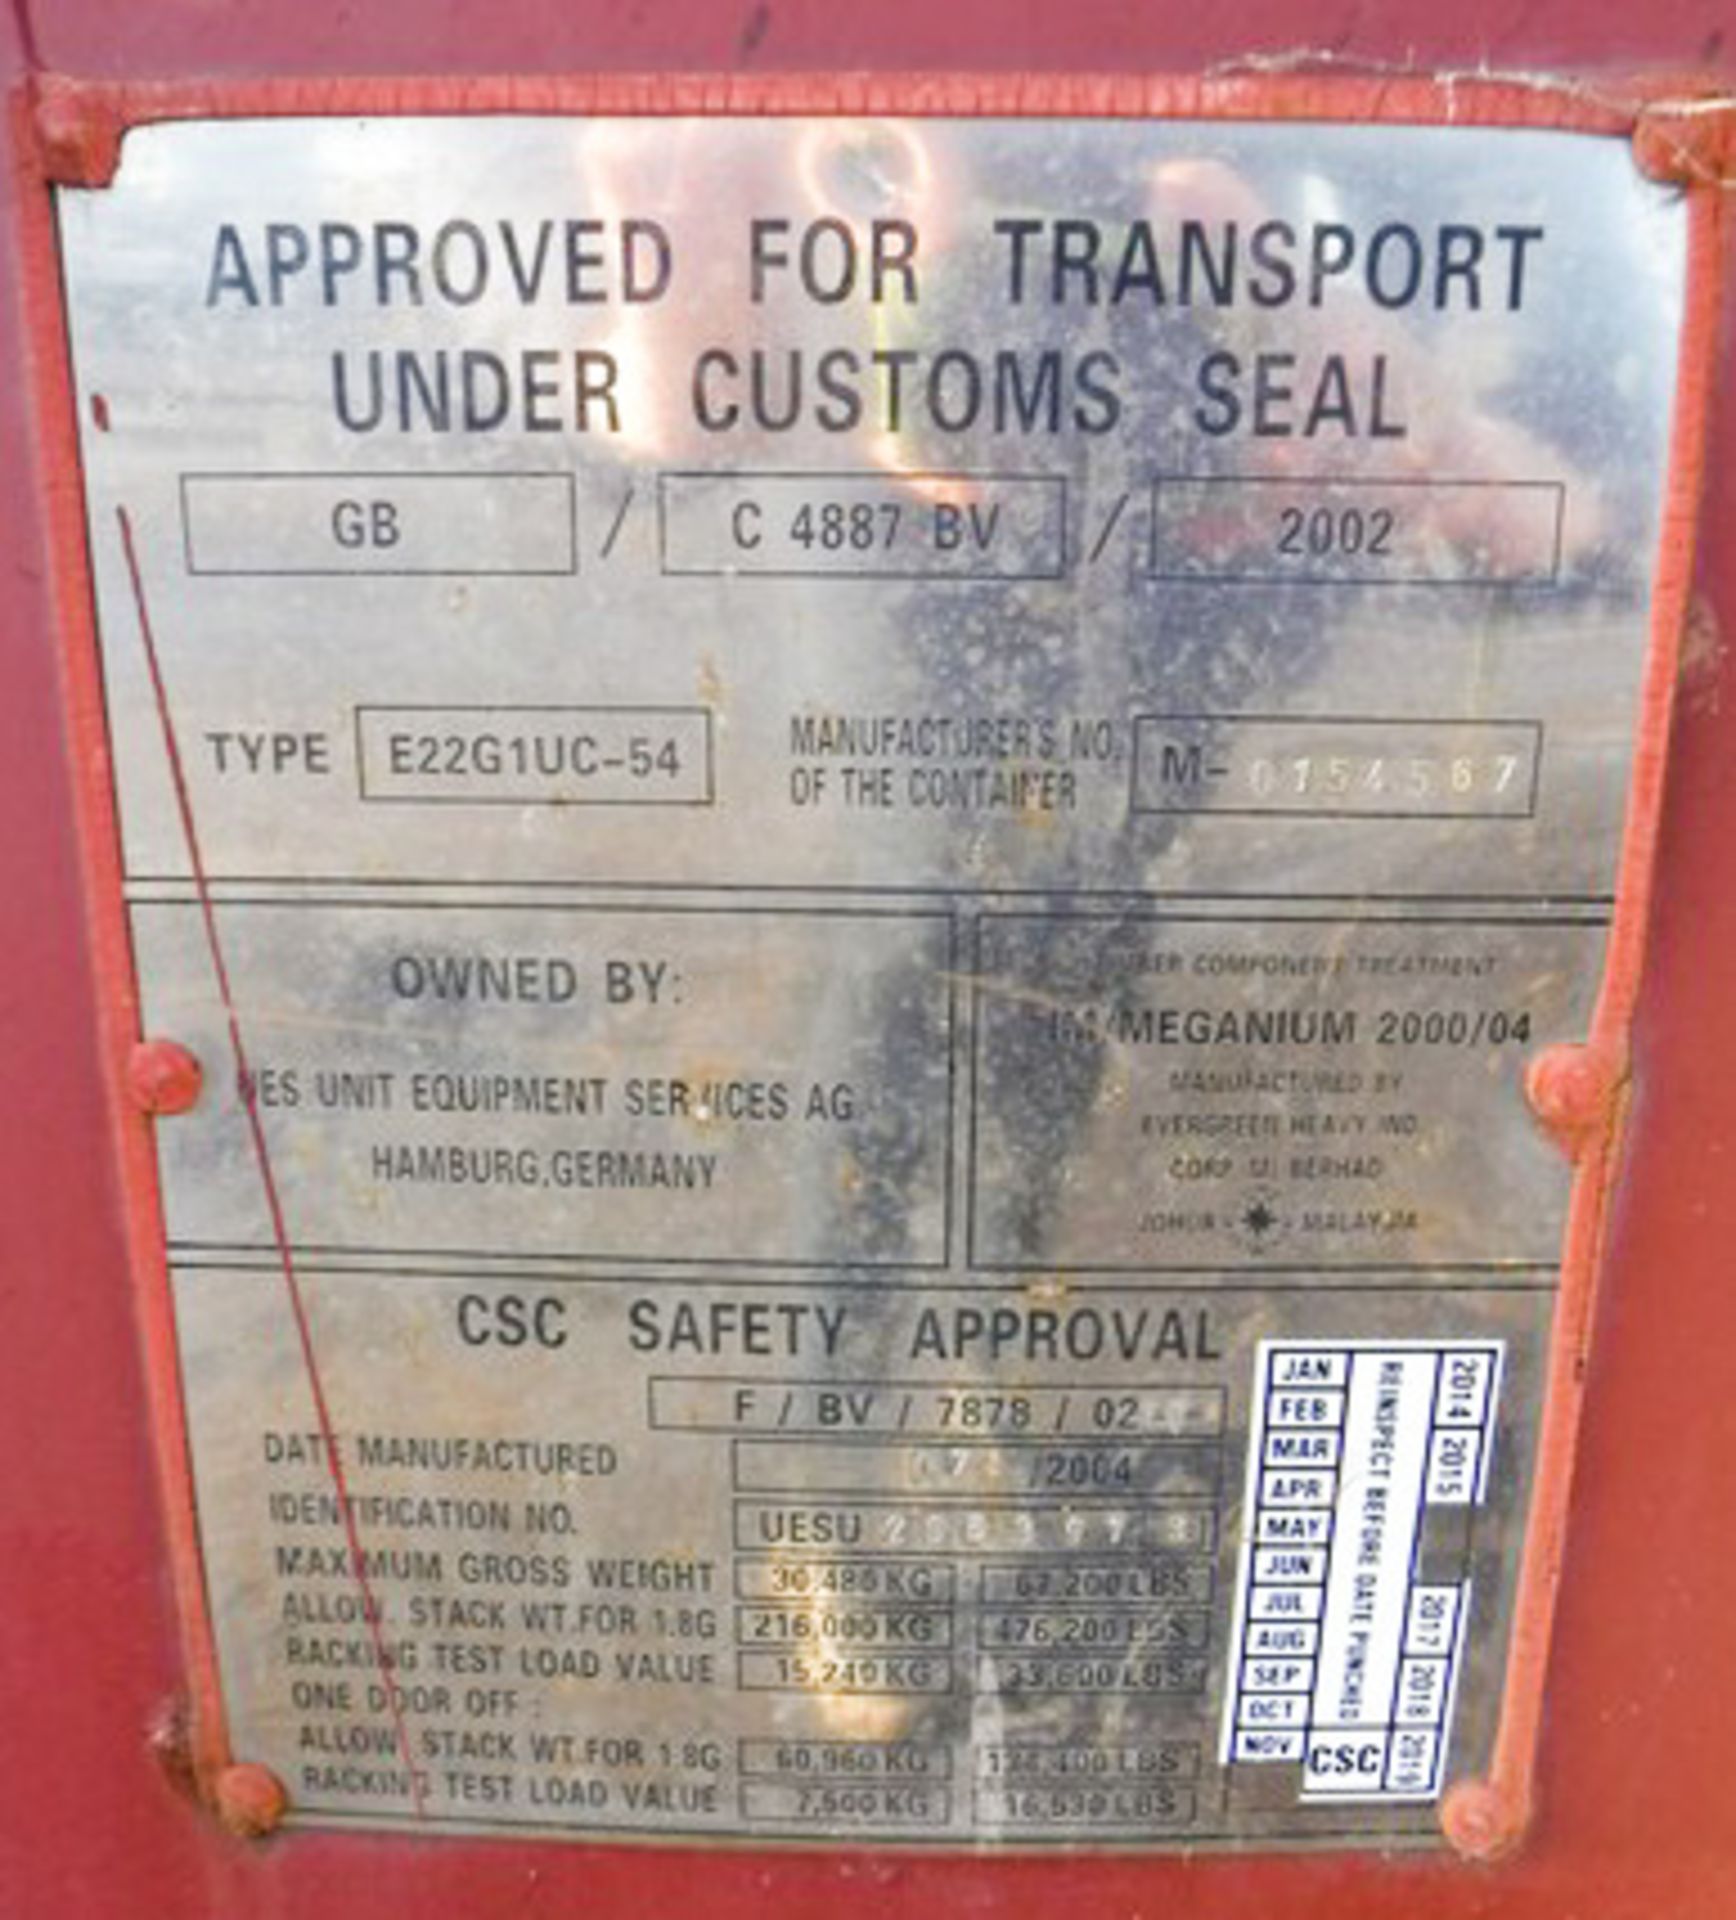 USED 20FT SHIPPING CONTAINER, YEAR MANU - 2002, S/N USEU2363913 - Image 7 of 7